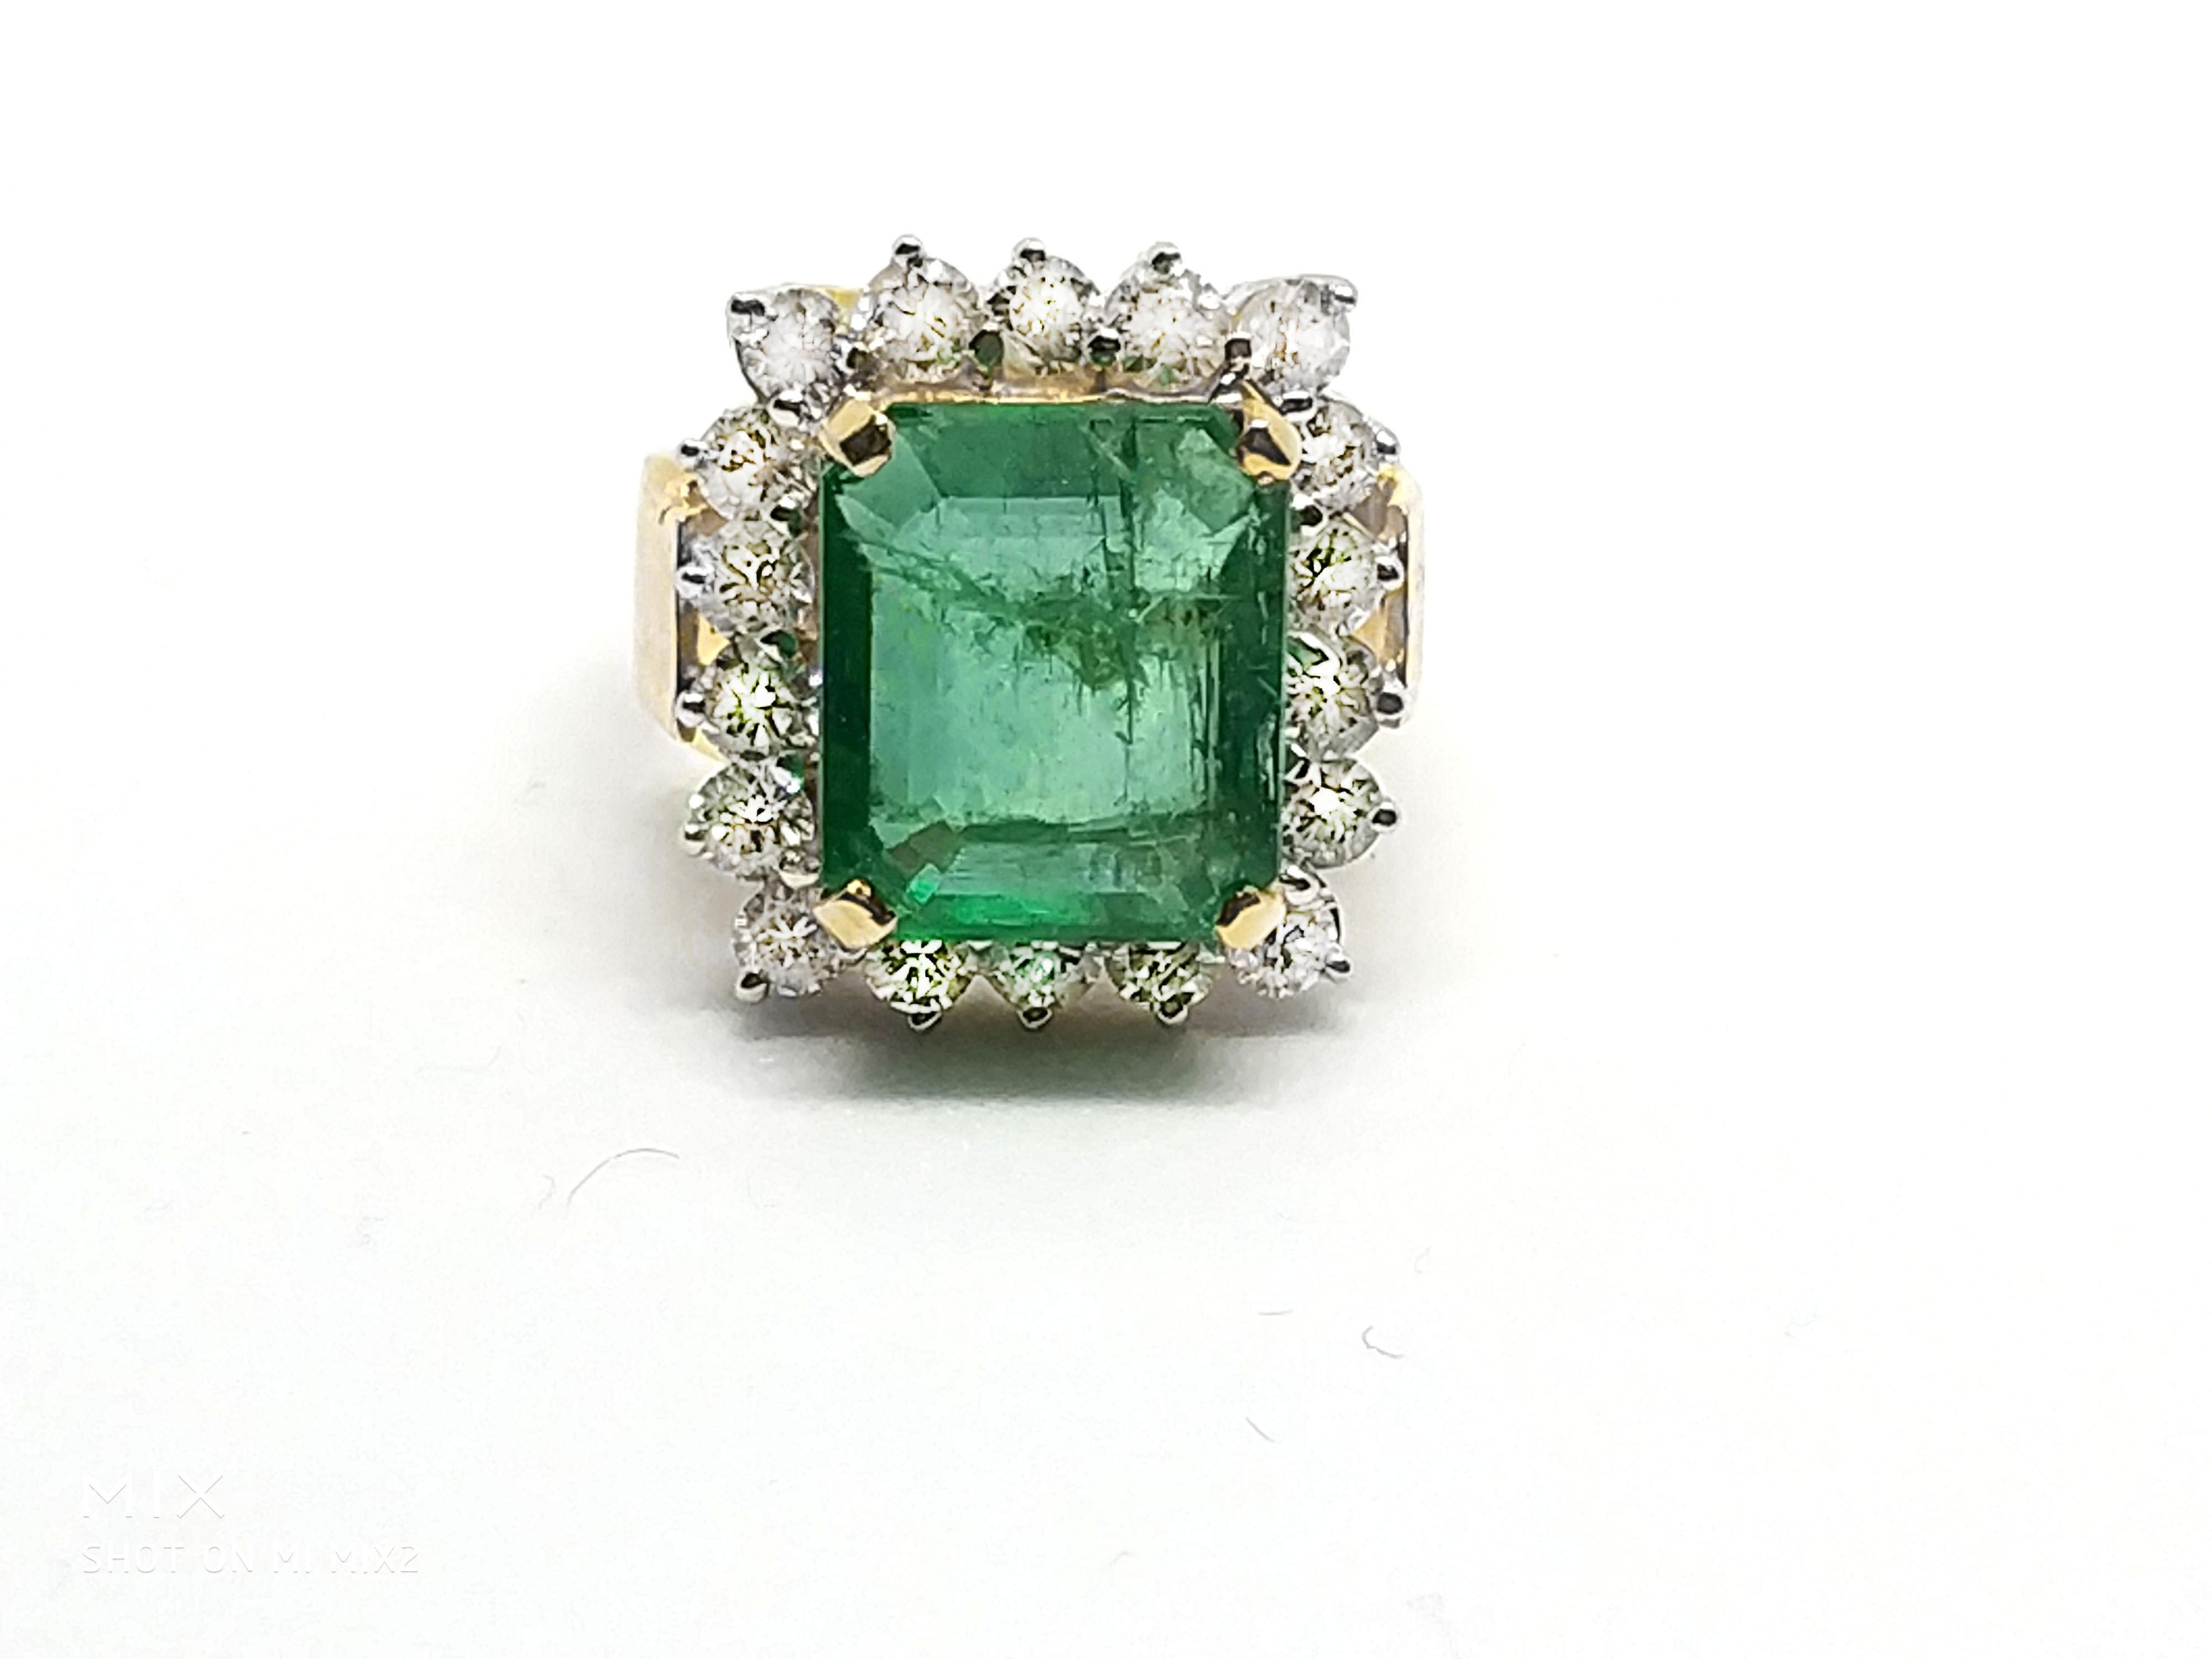 Beautiful emerald with lot of fire and beauty surrounded by white and eye clear diamonds.
6.16 carat certified emerald and
2.3 carat diamond
in 18 carat yellow gold